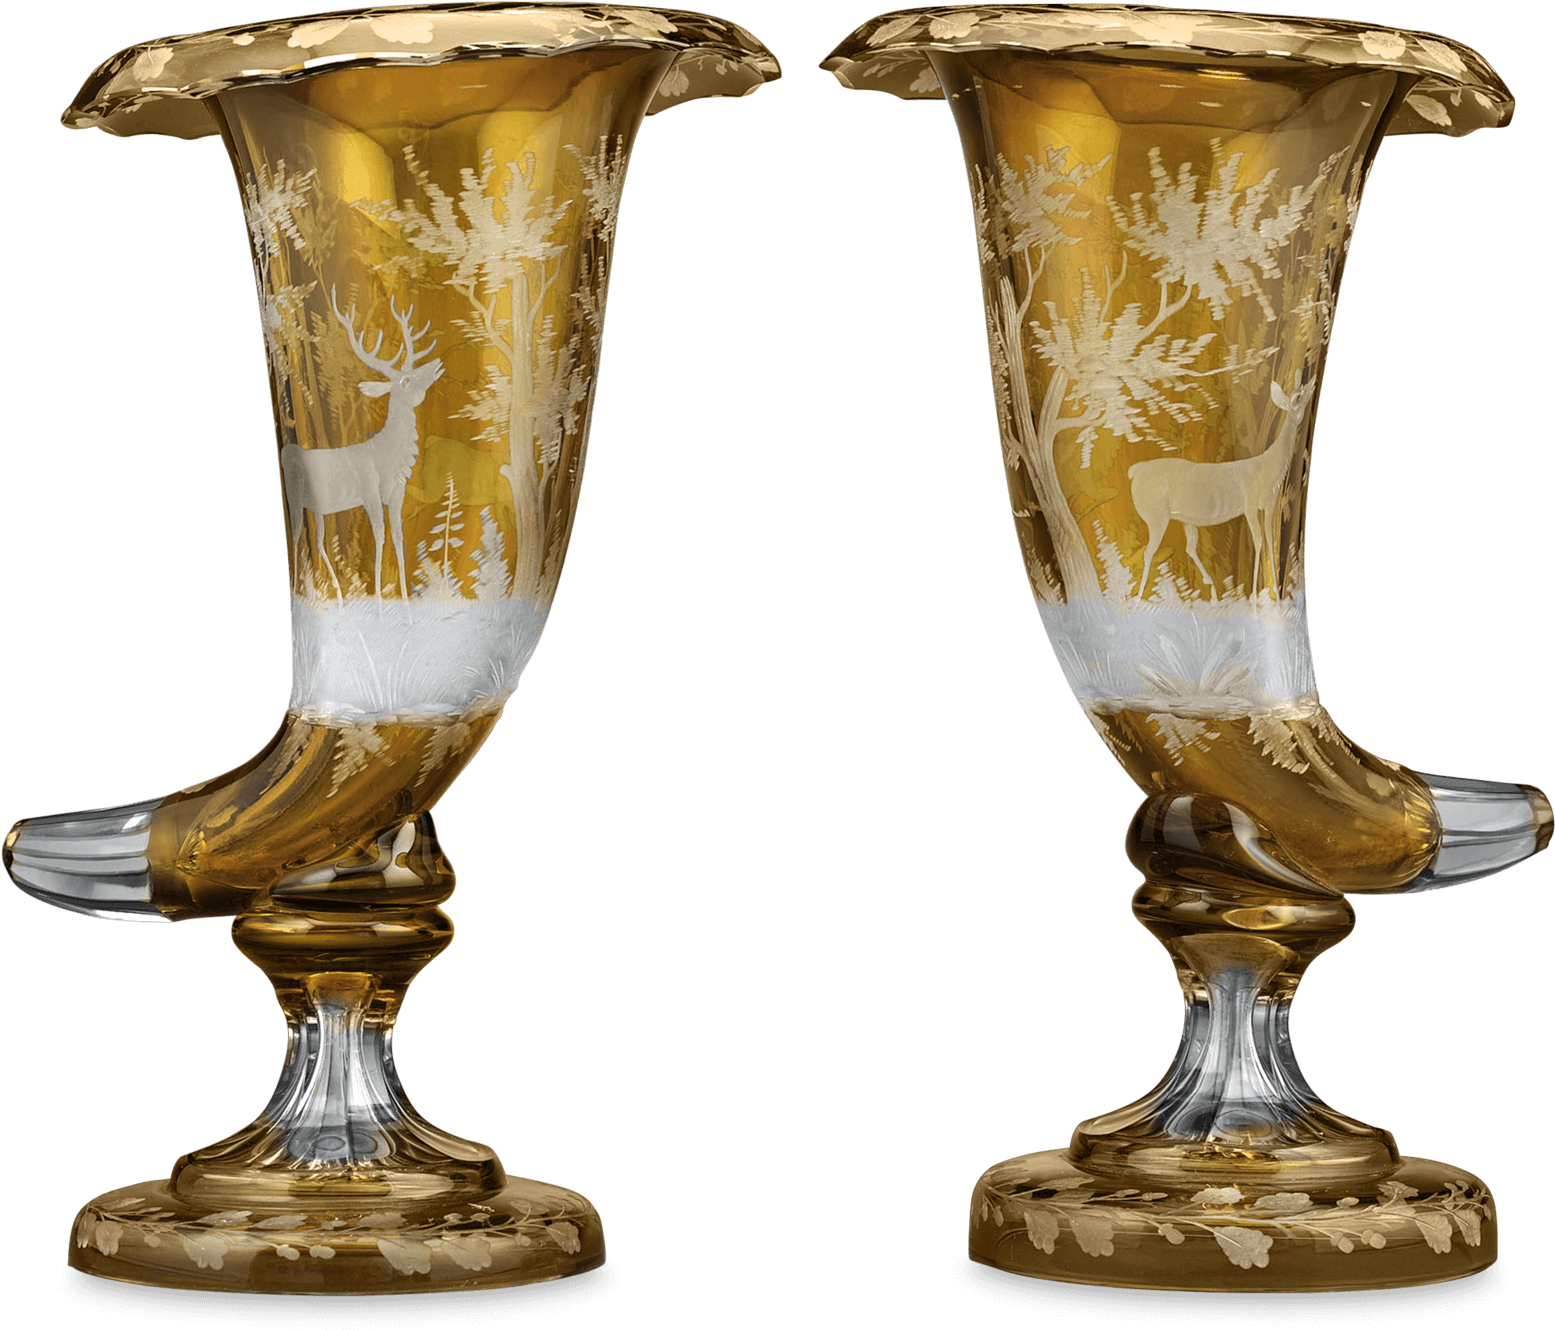 Antique Glass PNG Image High Quality PNG Image